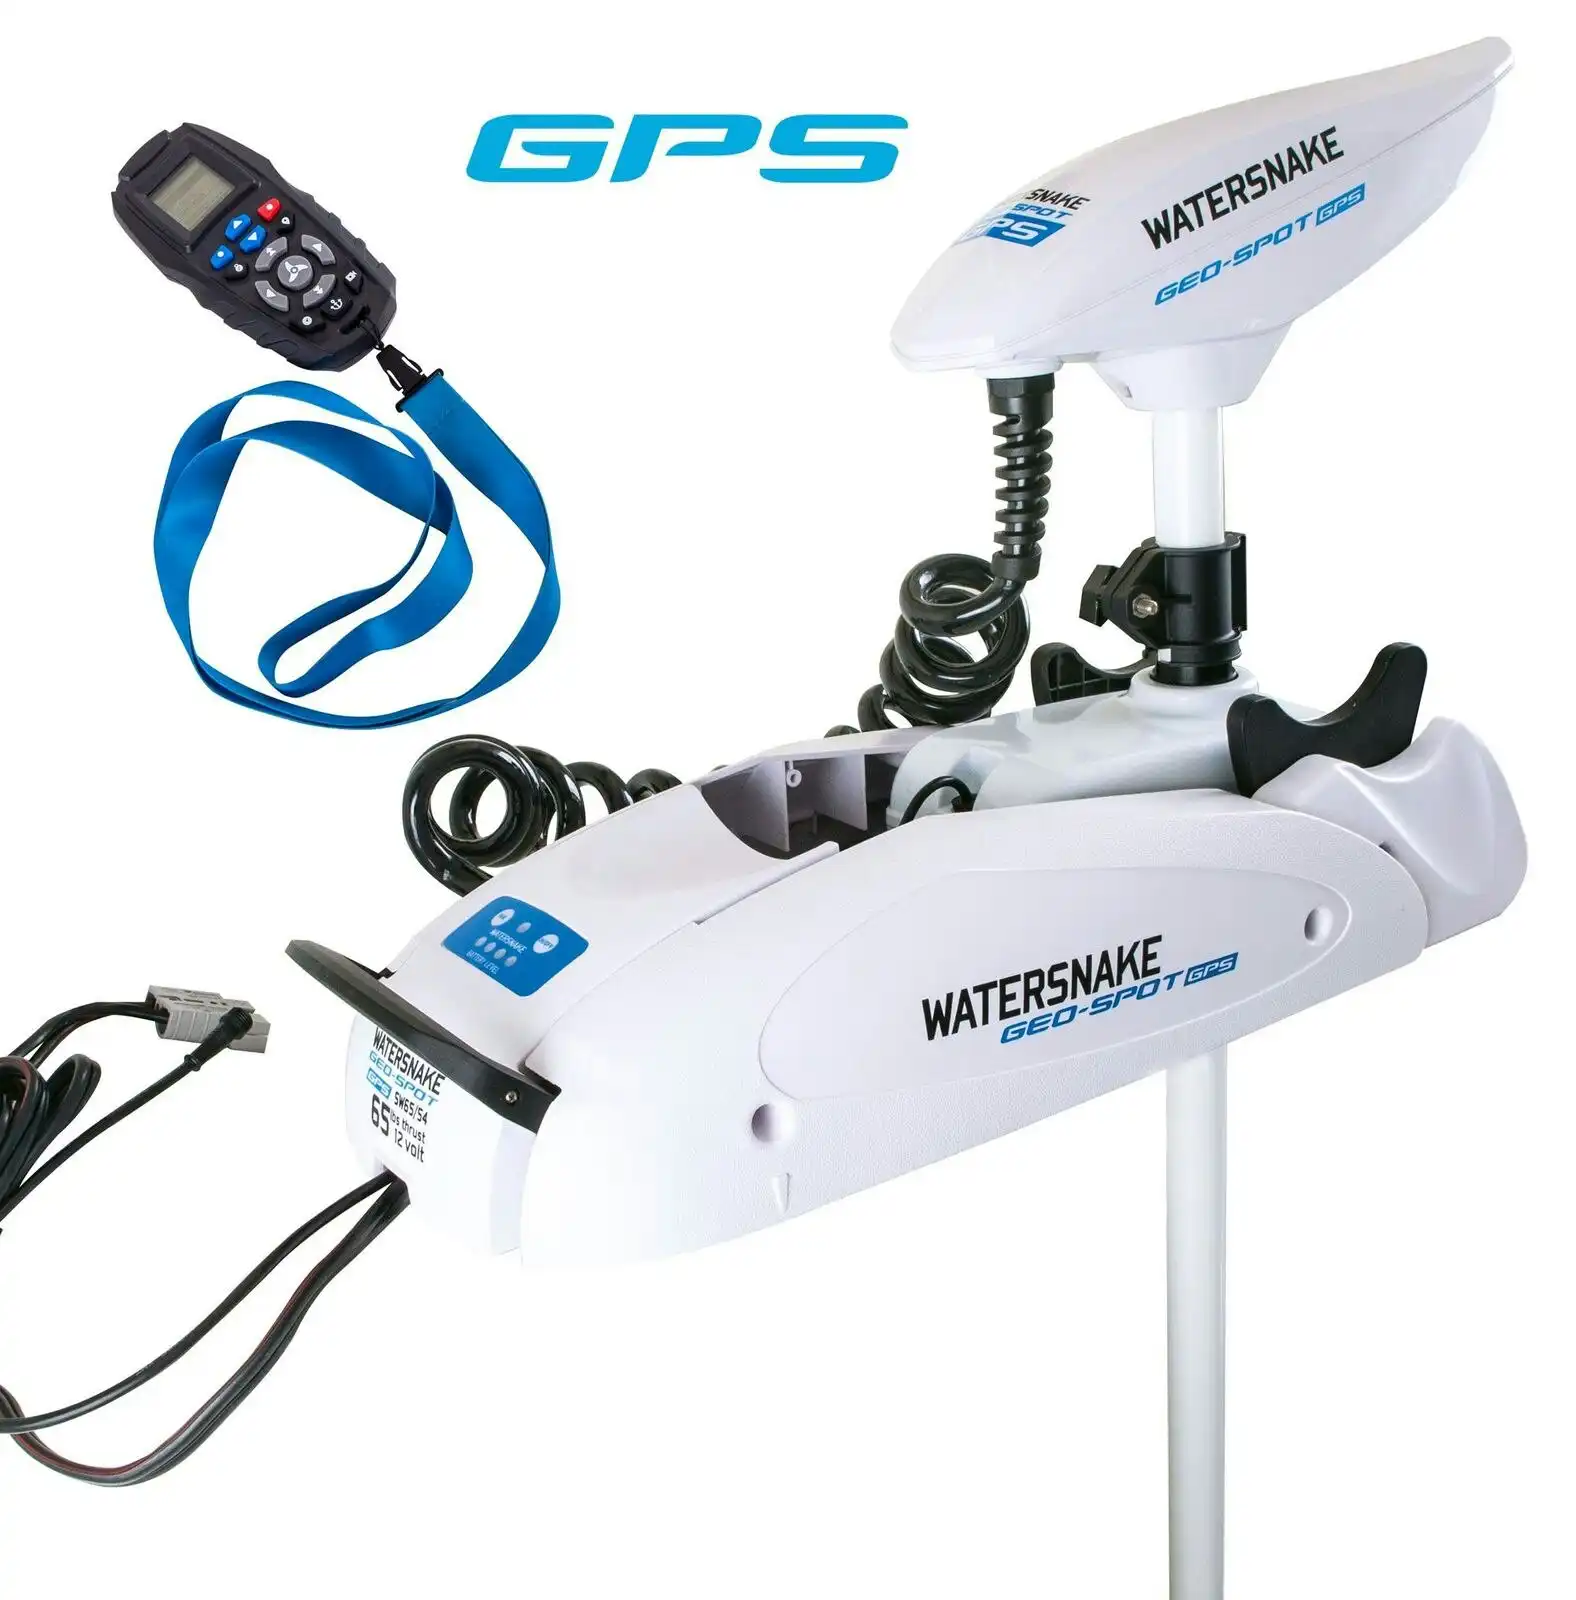 Watersnake Geo Spot 65/54 Remote Control GPS Bow Mount Electric Motor-65lb Thrust